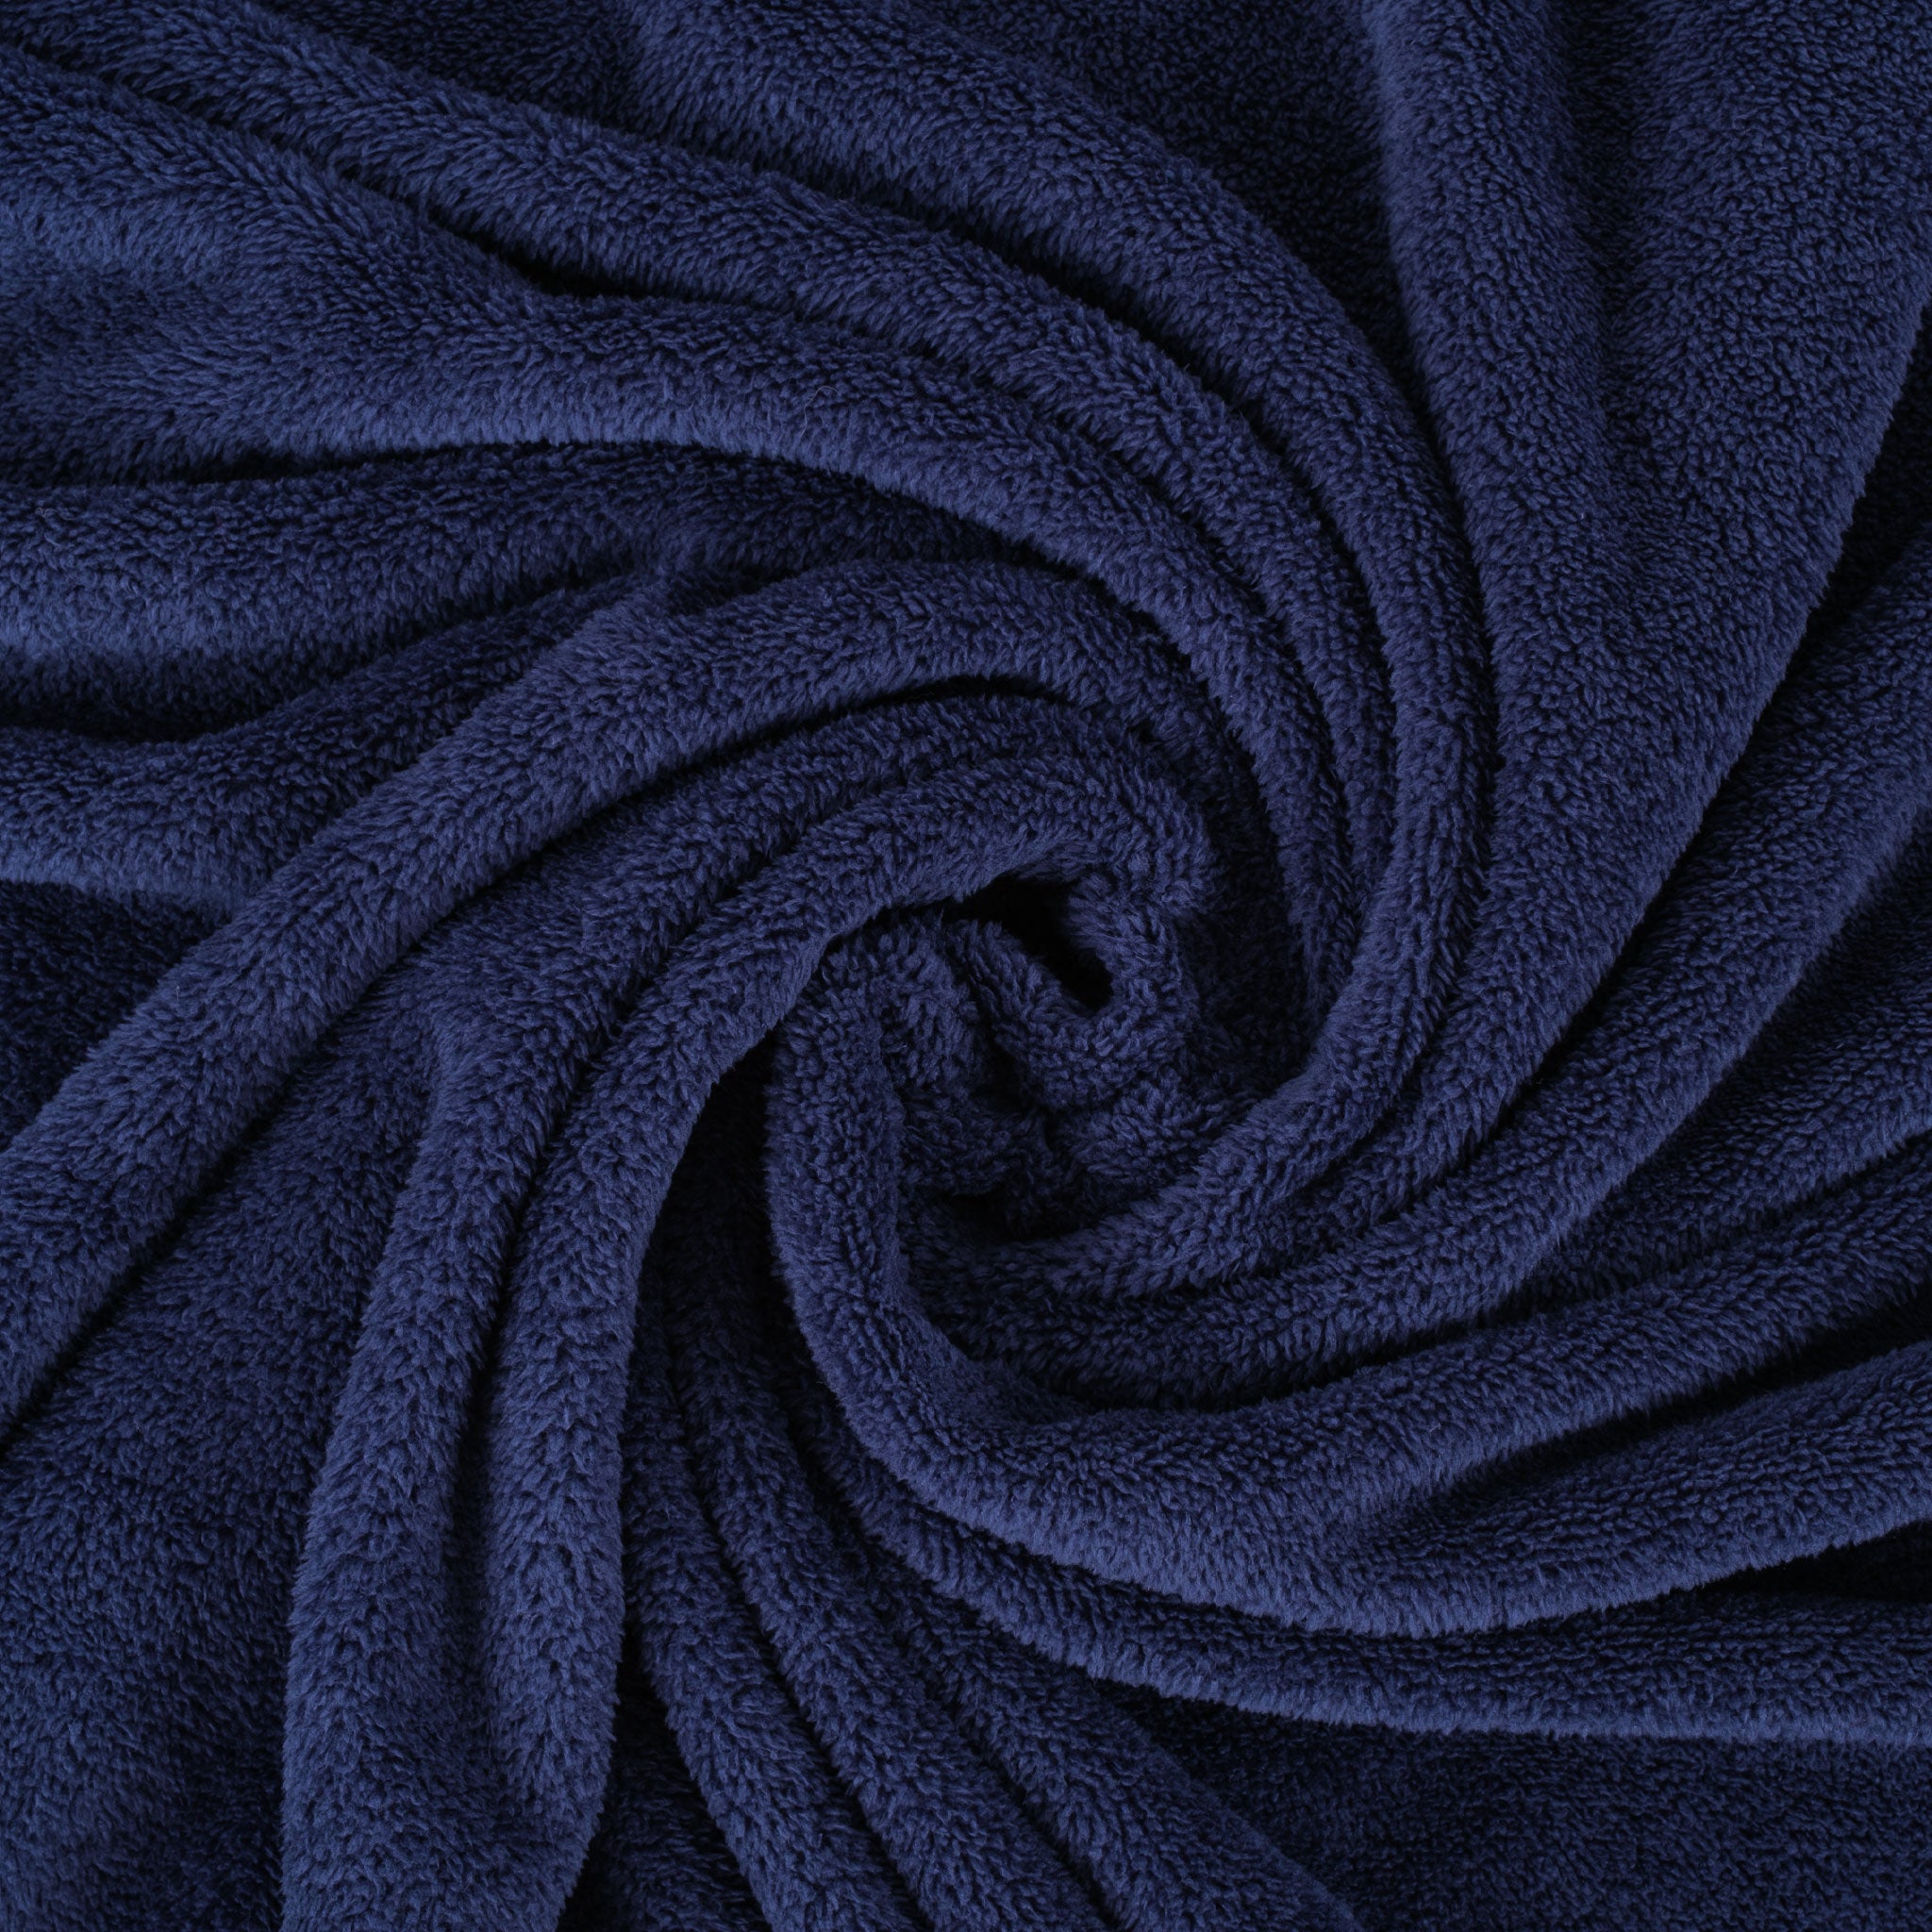 American Soft Linen - Bedding Fleece Blanket - Wholesale - 15 Set Case Pack - Twin Size 60x80 inches - Navy-Blue - 5